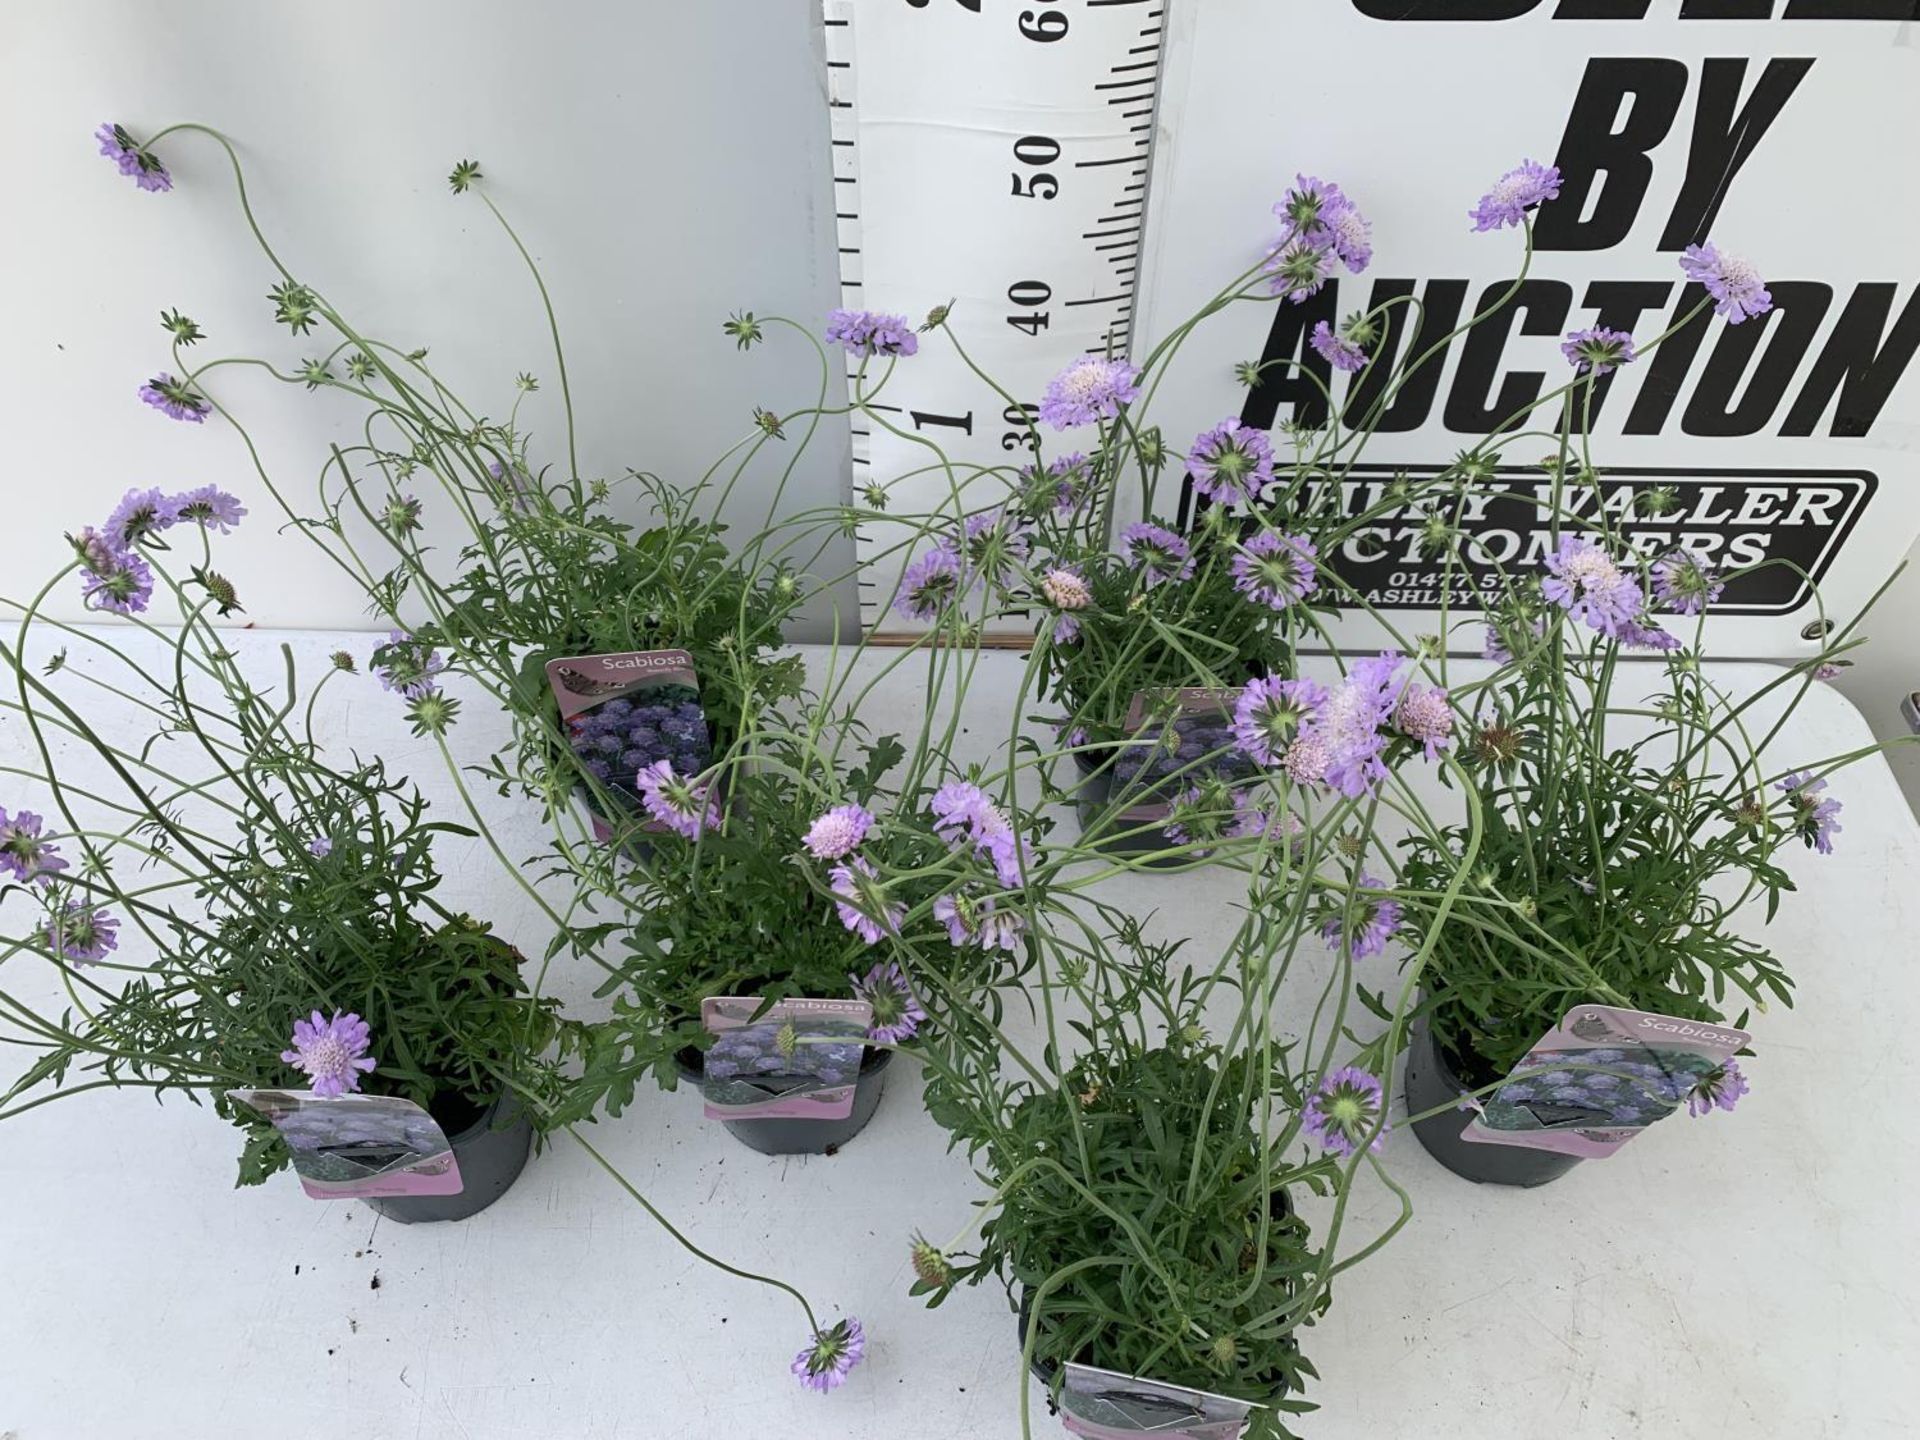 SIX SCABIOSA BUTTERFLY BLUE IN 2 LTR POTS 50-60CM TALL TO BE SOLD FOR THE SIX PLUS VAT - Image 4 of 8